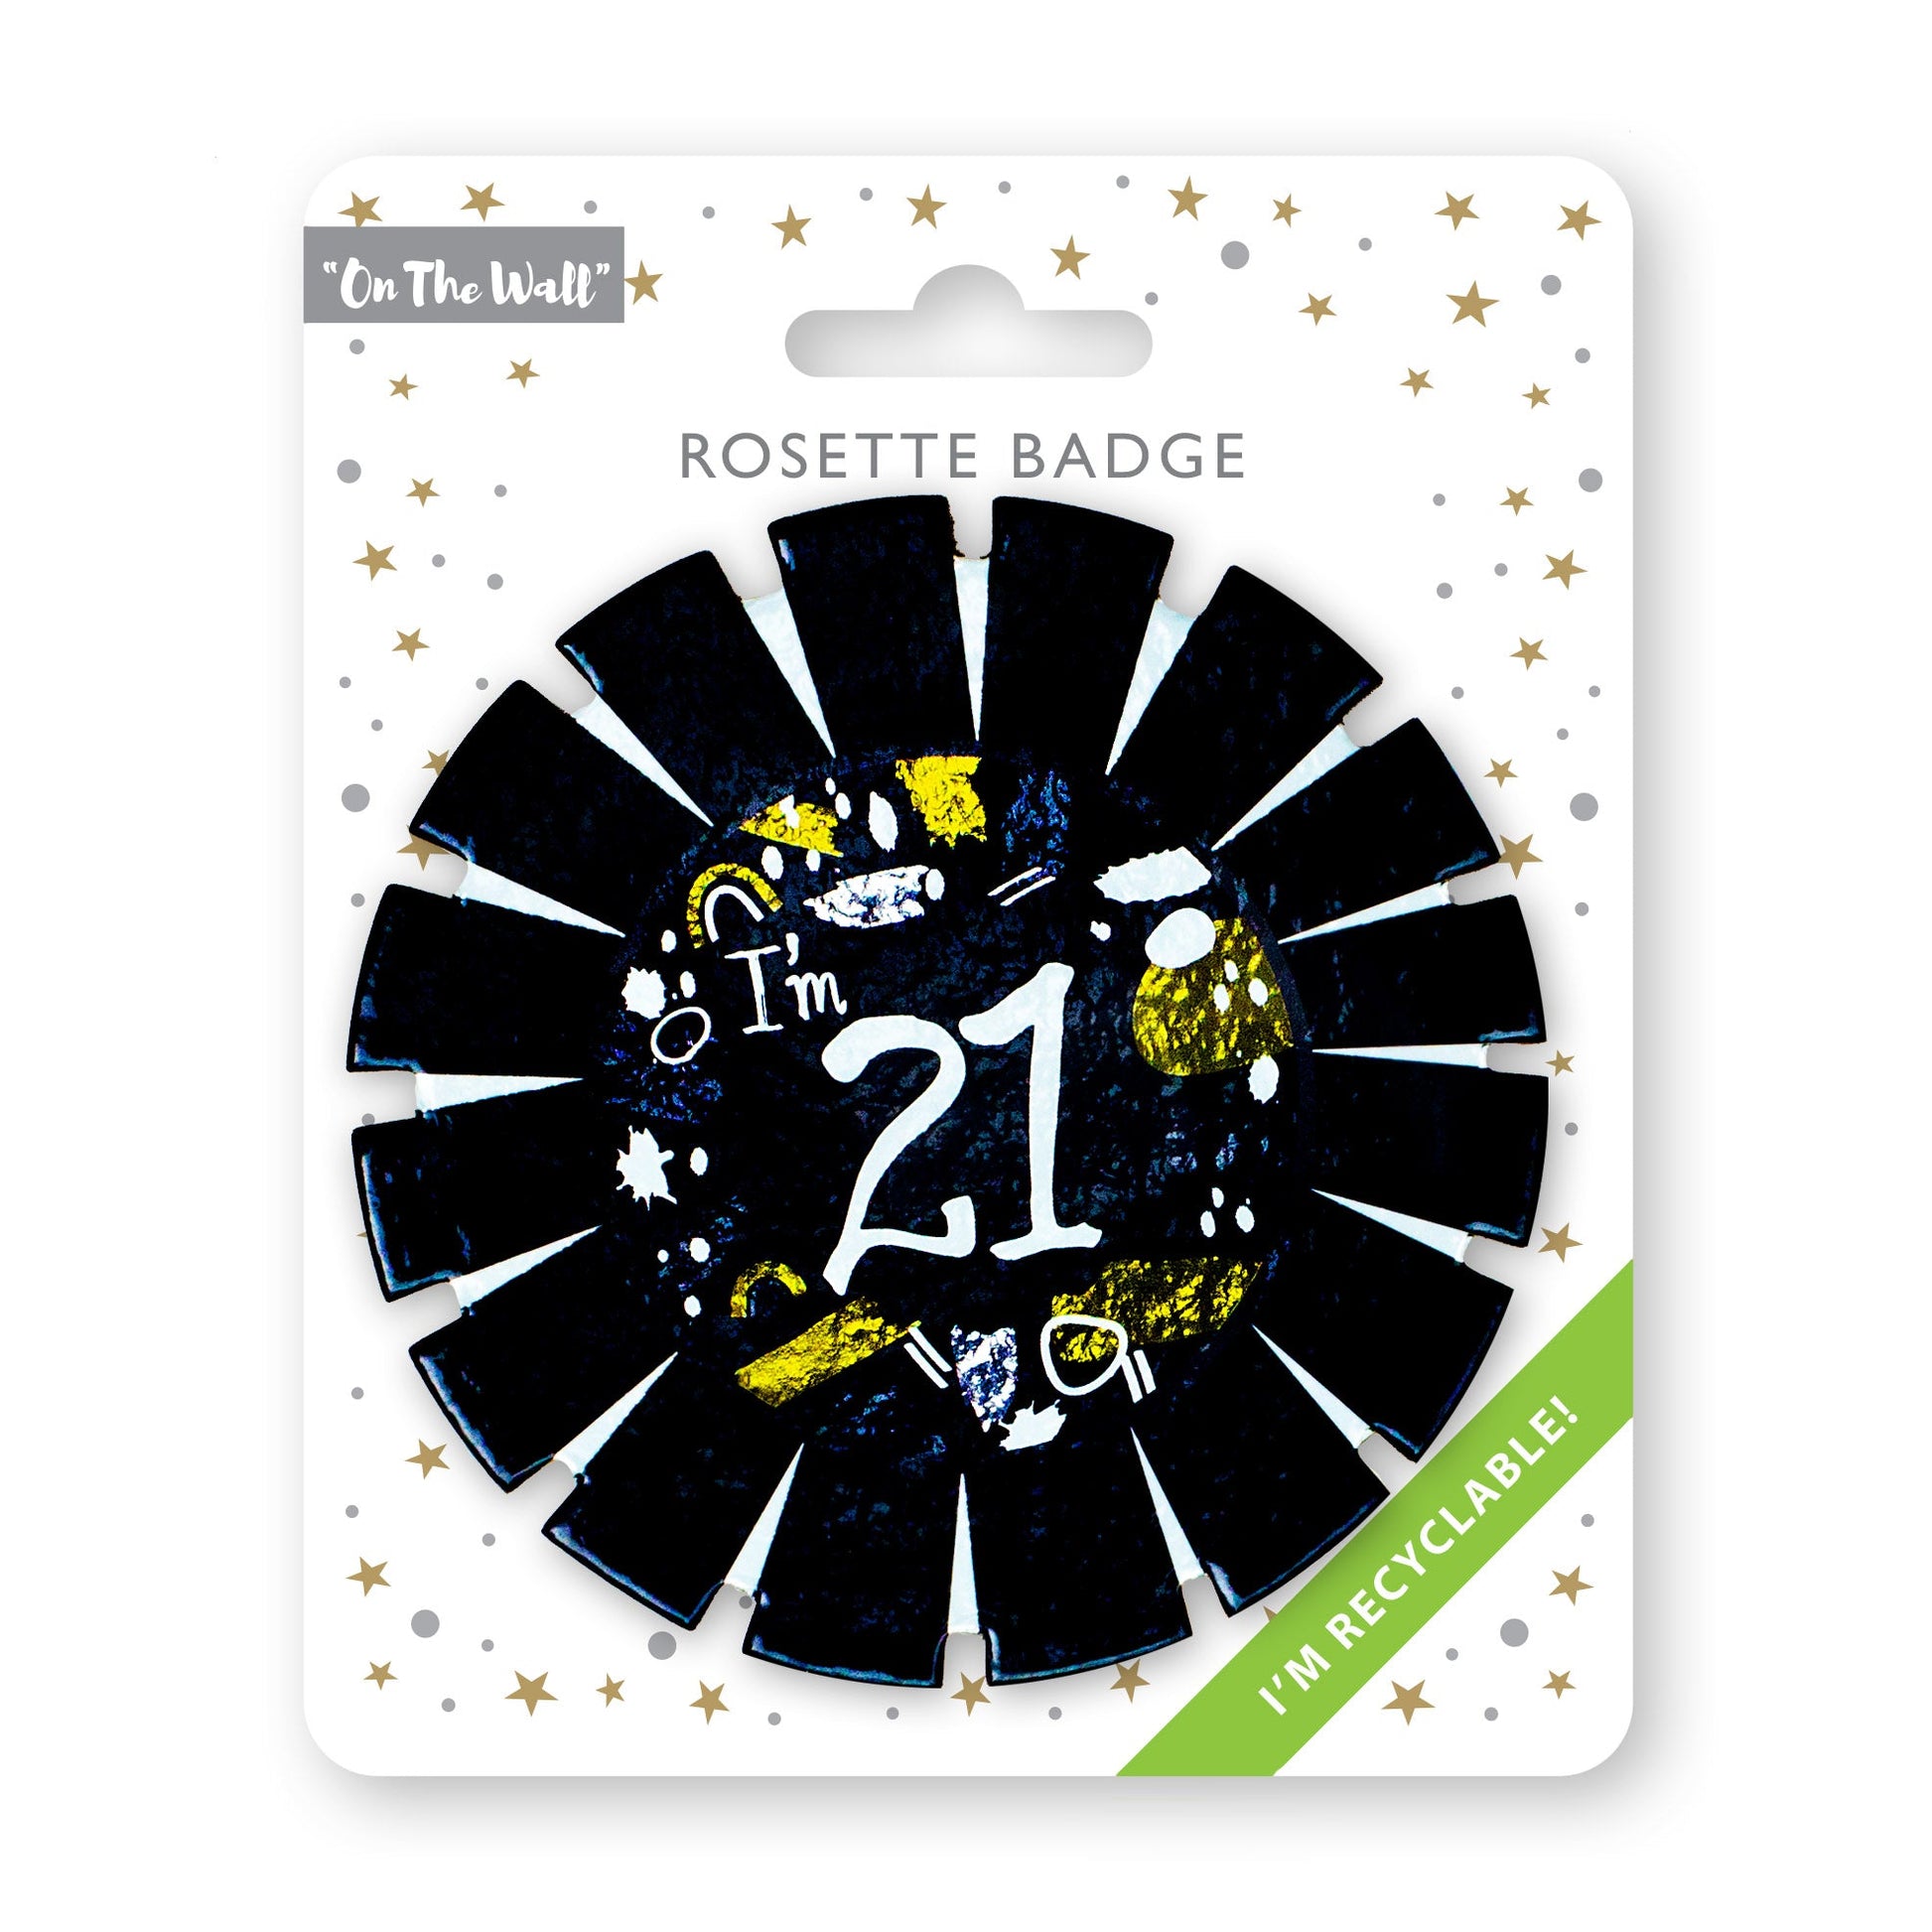 Age 21 Black and White Card Rosette Badge 2